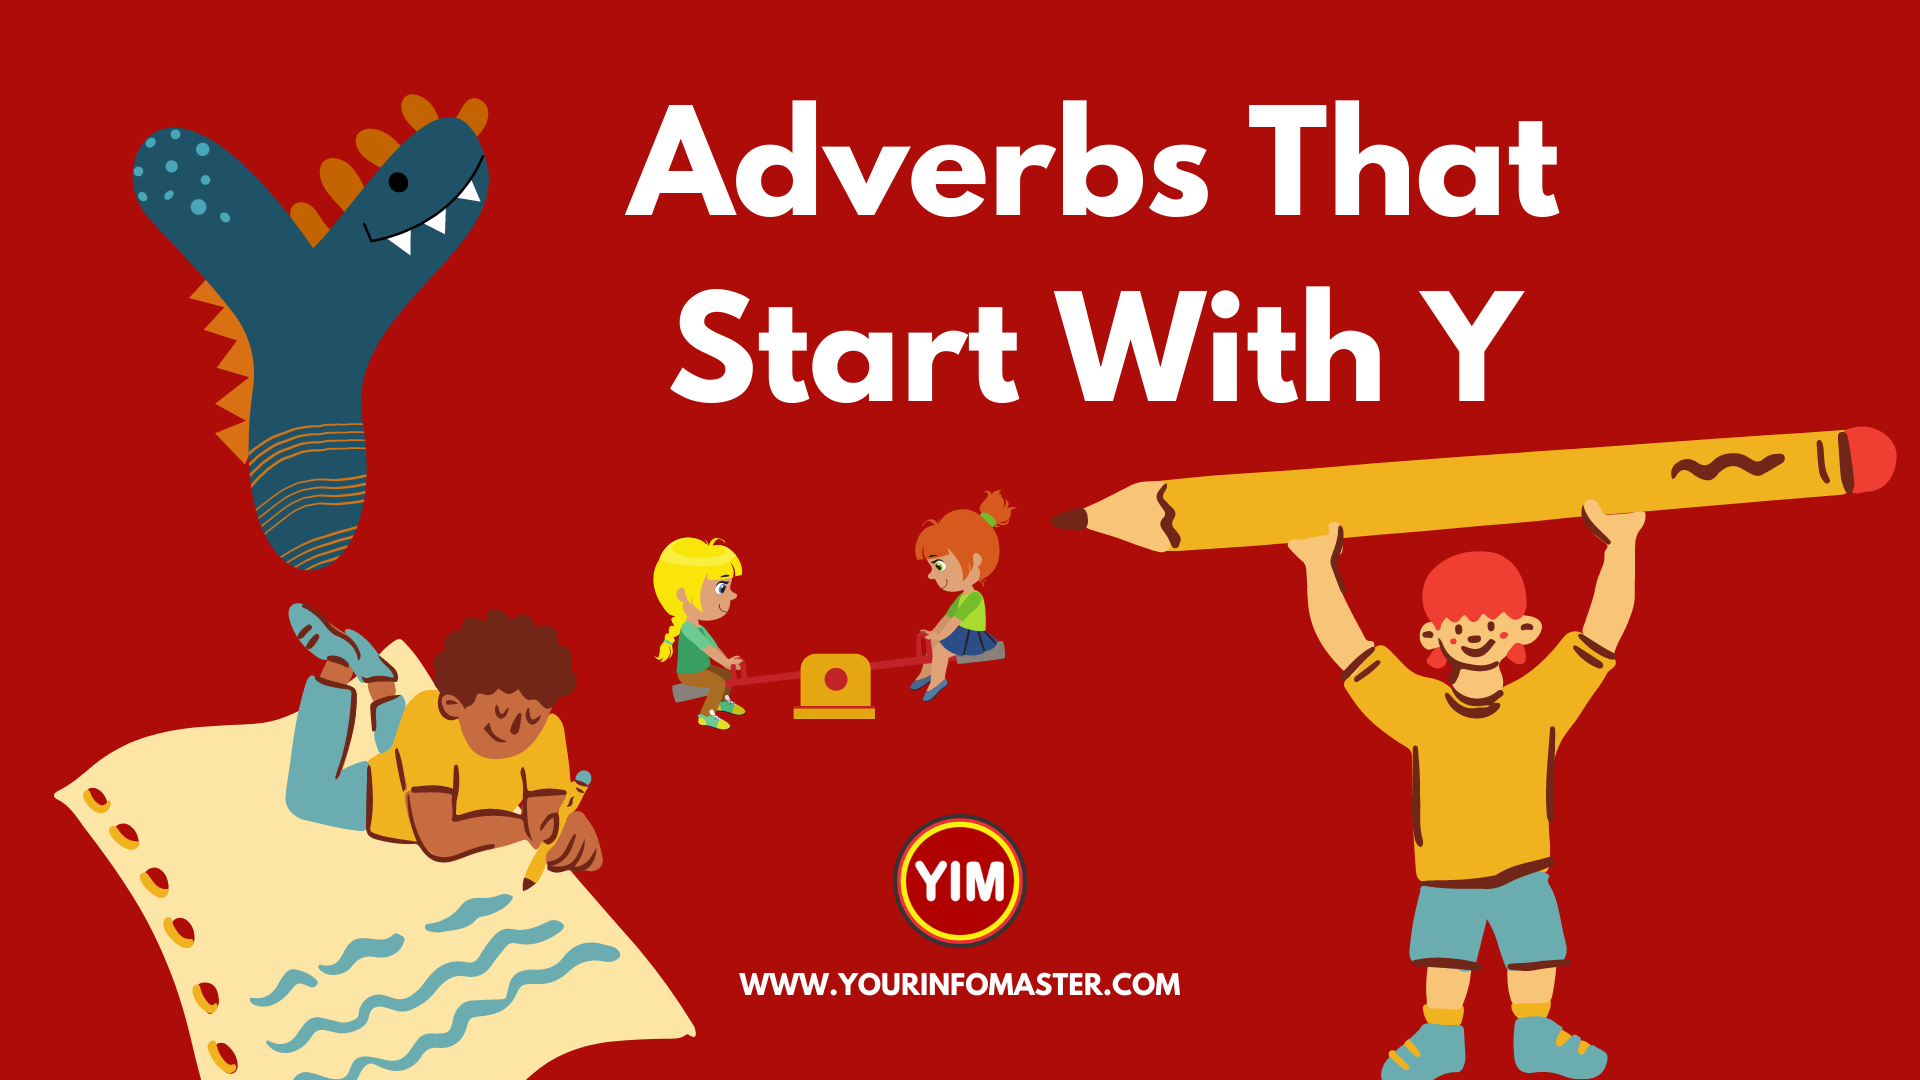 4 letter words, 5 letter words, 6 letter words, 7 letter words, 8 Letter words, Adverb Words, Adverbs, Adverbs That Start With Y, English, English Adverbs, English Grammar, English Vocabulary, Vocabulary, Words That Start with Y, Y Adverbs, Y words